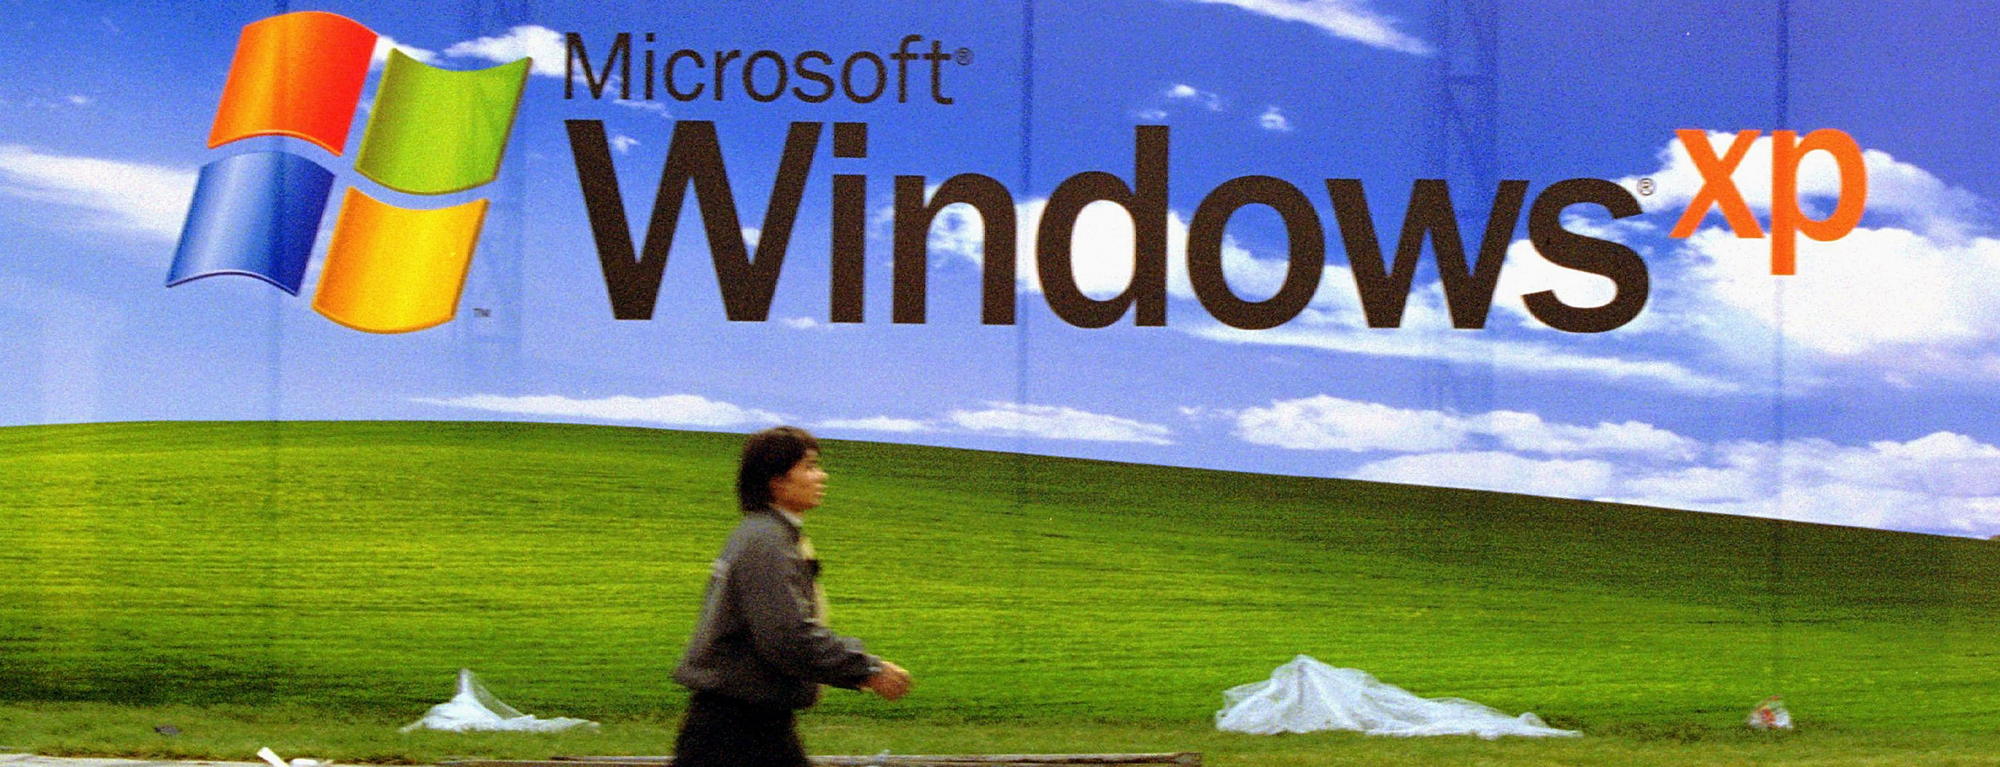 Ever wonder where the Windows XP default wallpaper came from